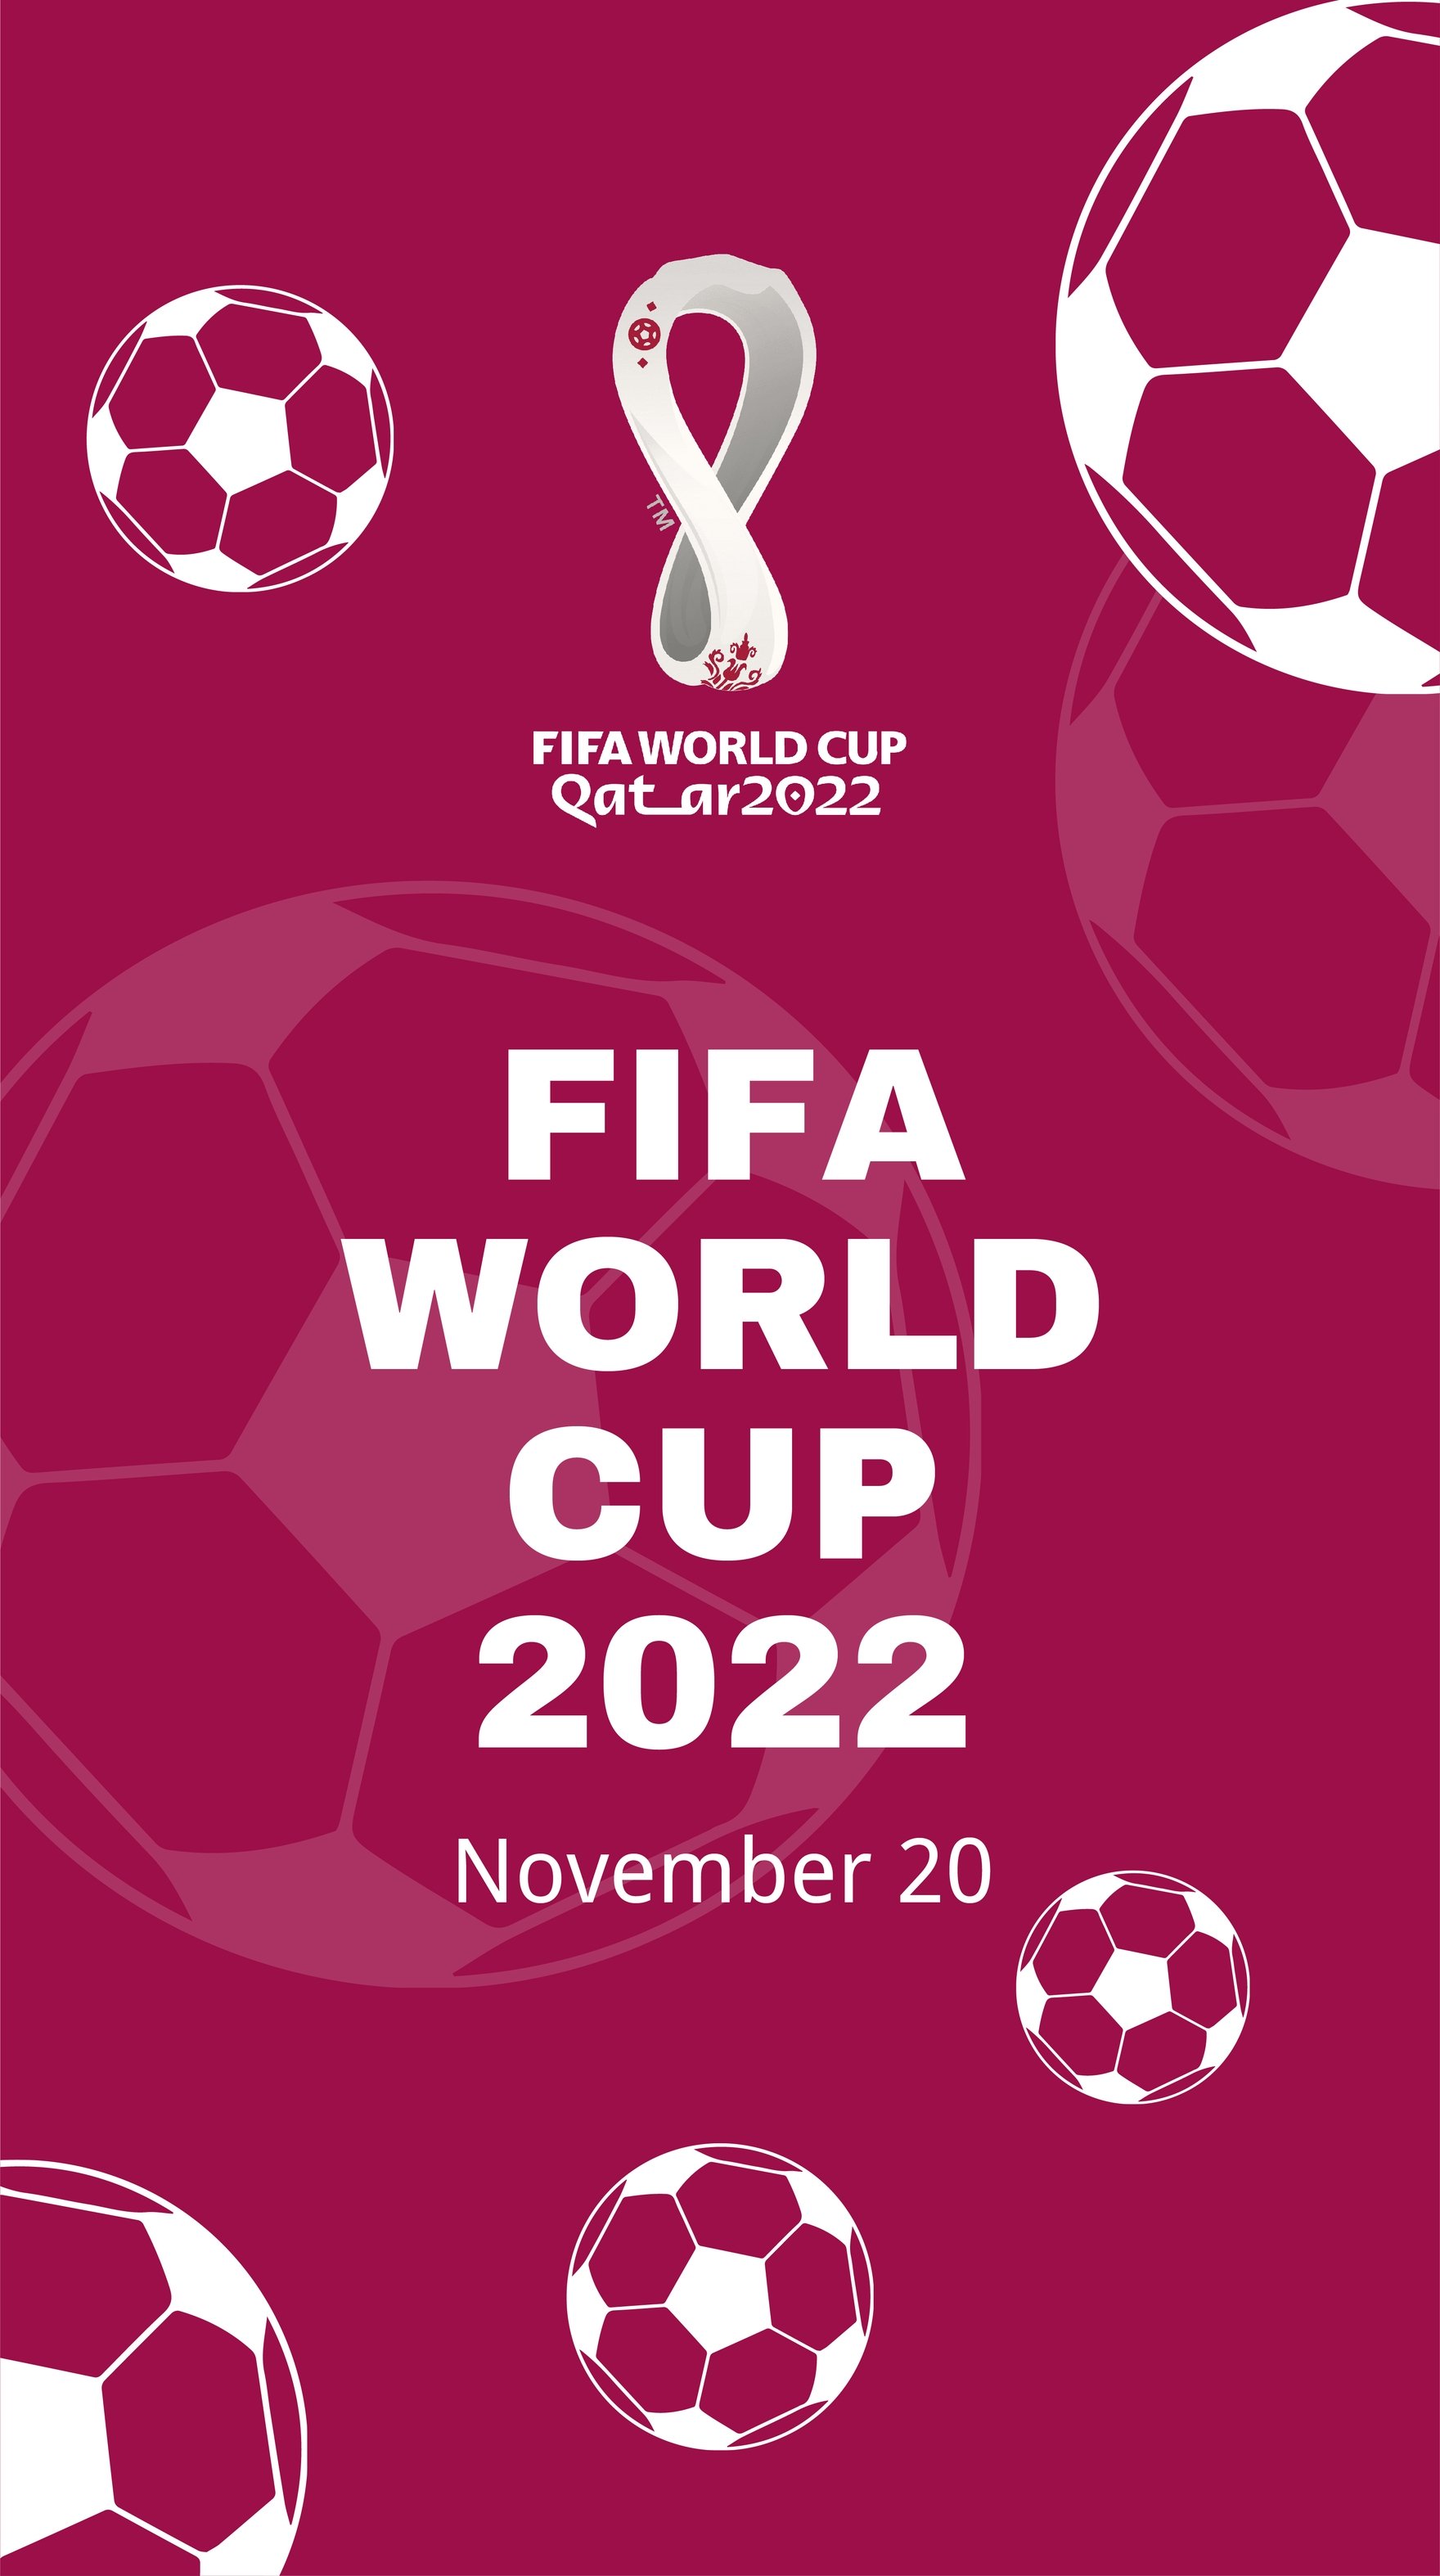 FIFA WORLD CUP 2022 Template